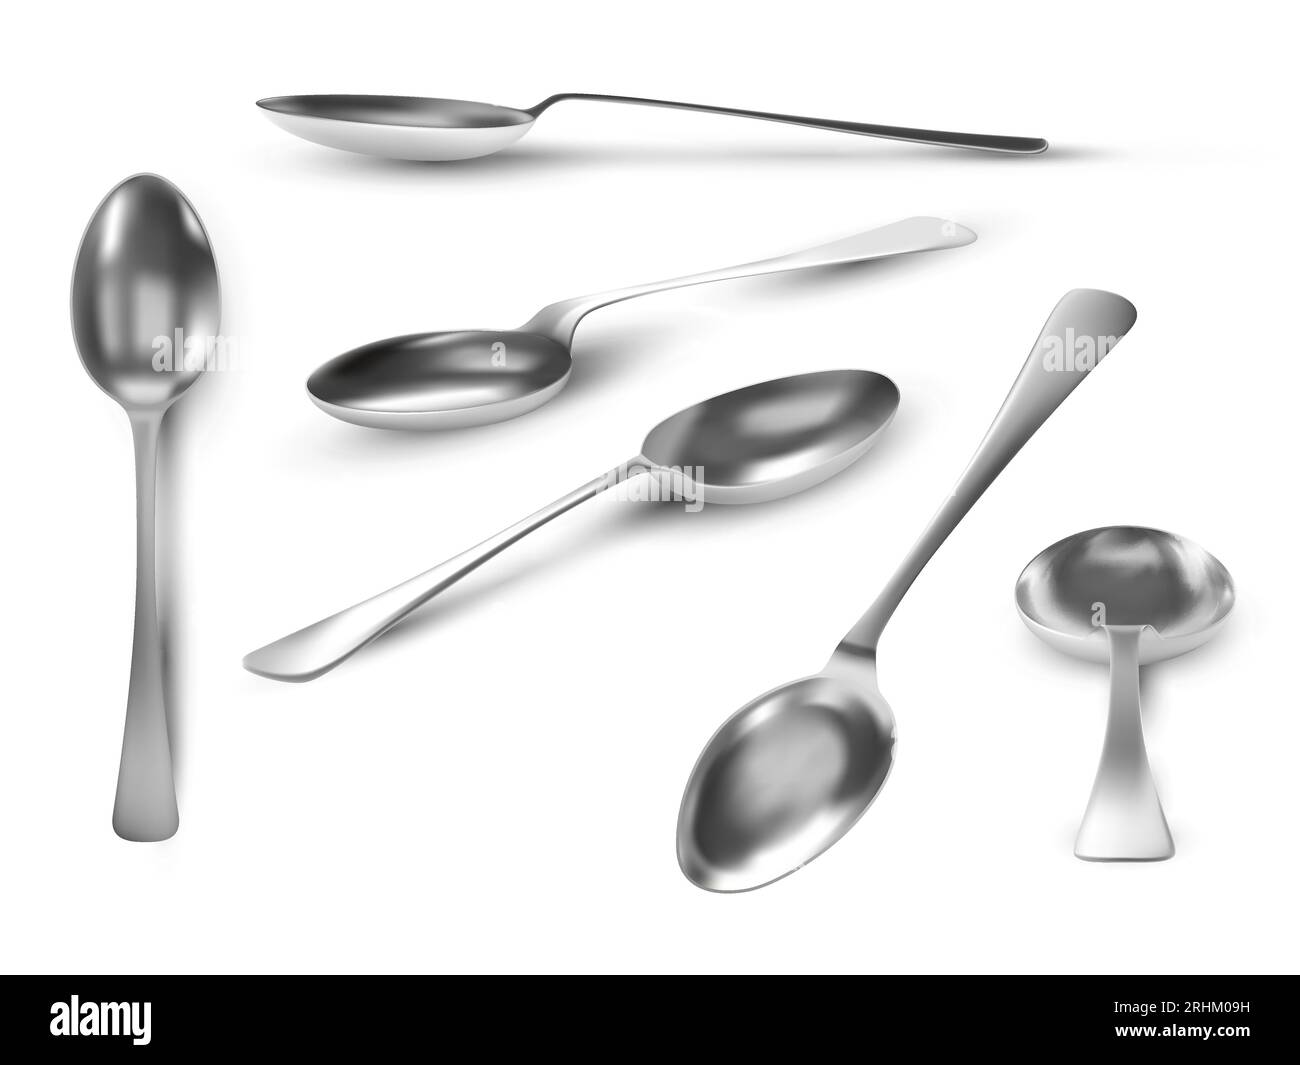 221,098 Metal Spoon Images, Stock Photos, 3D objects, & Vectors